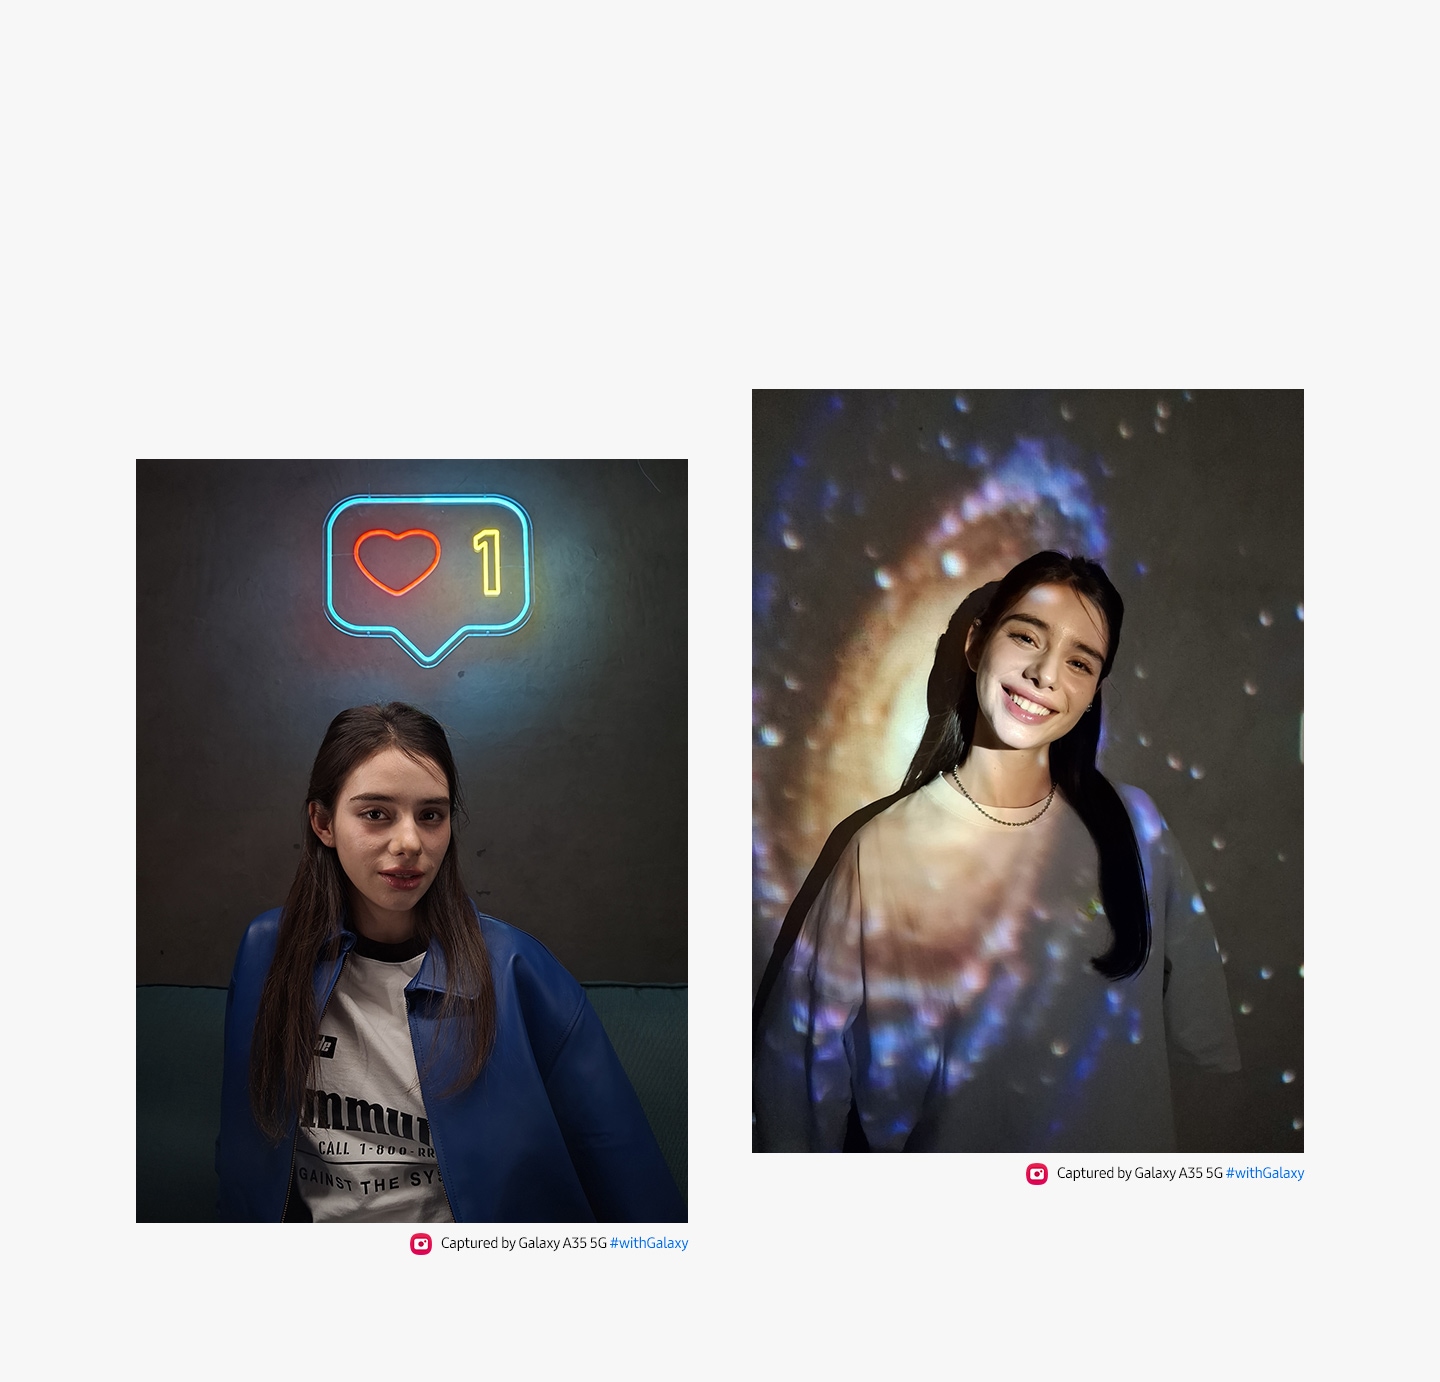 'Two portraits in low-light conditions. First portrait: A person sits. a neon above her head. Second portrait: the person is smiling, superimposed with a cosmic galaxy effect light. Text reads Captured by Galaxy A35 5G #withGalaxy.